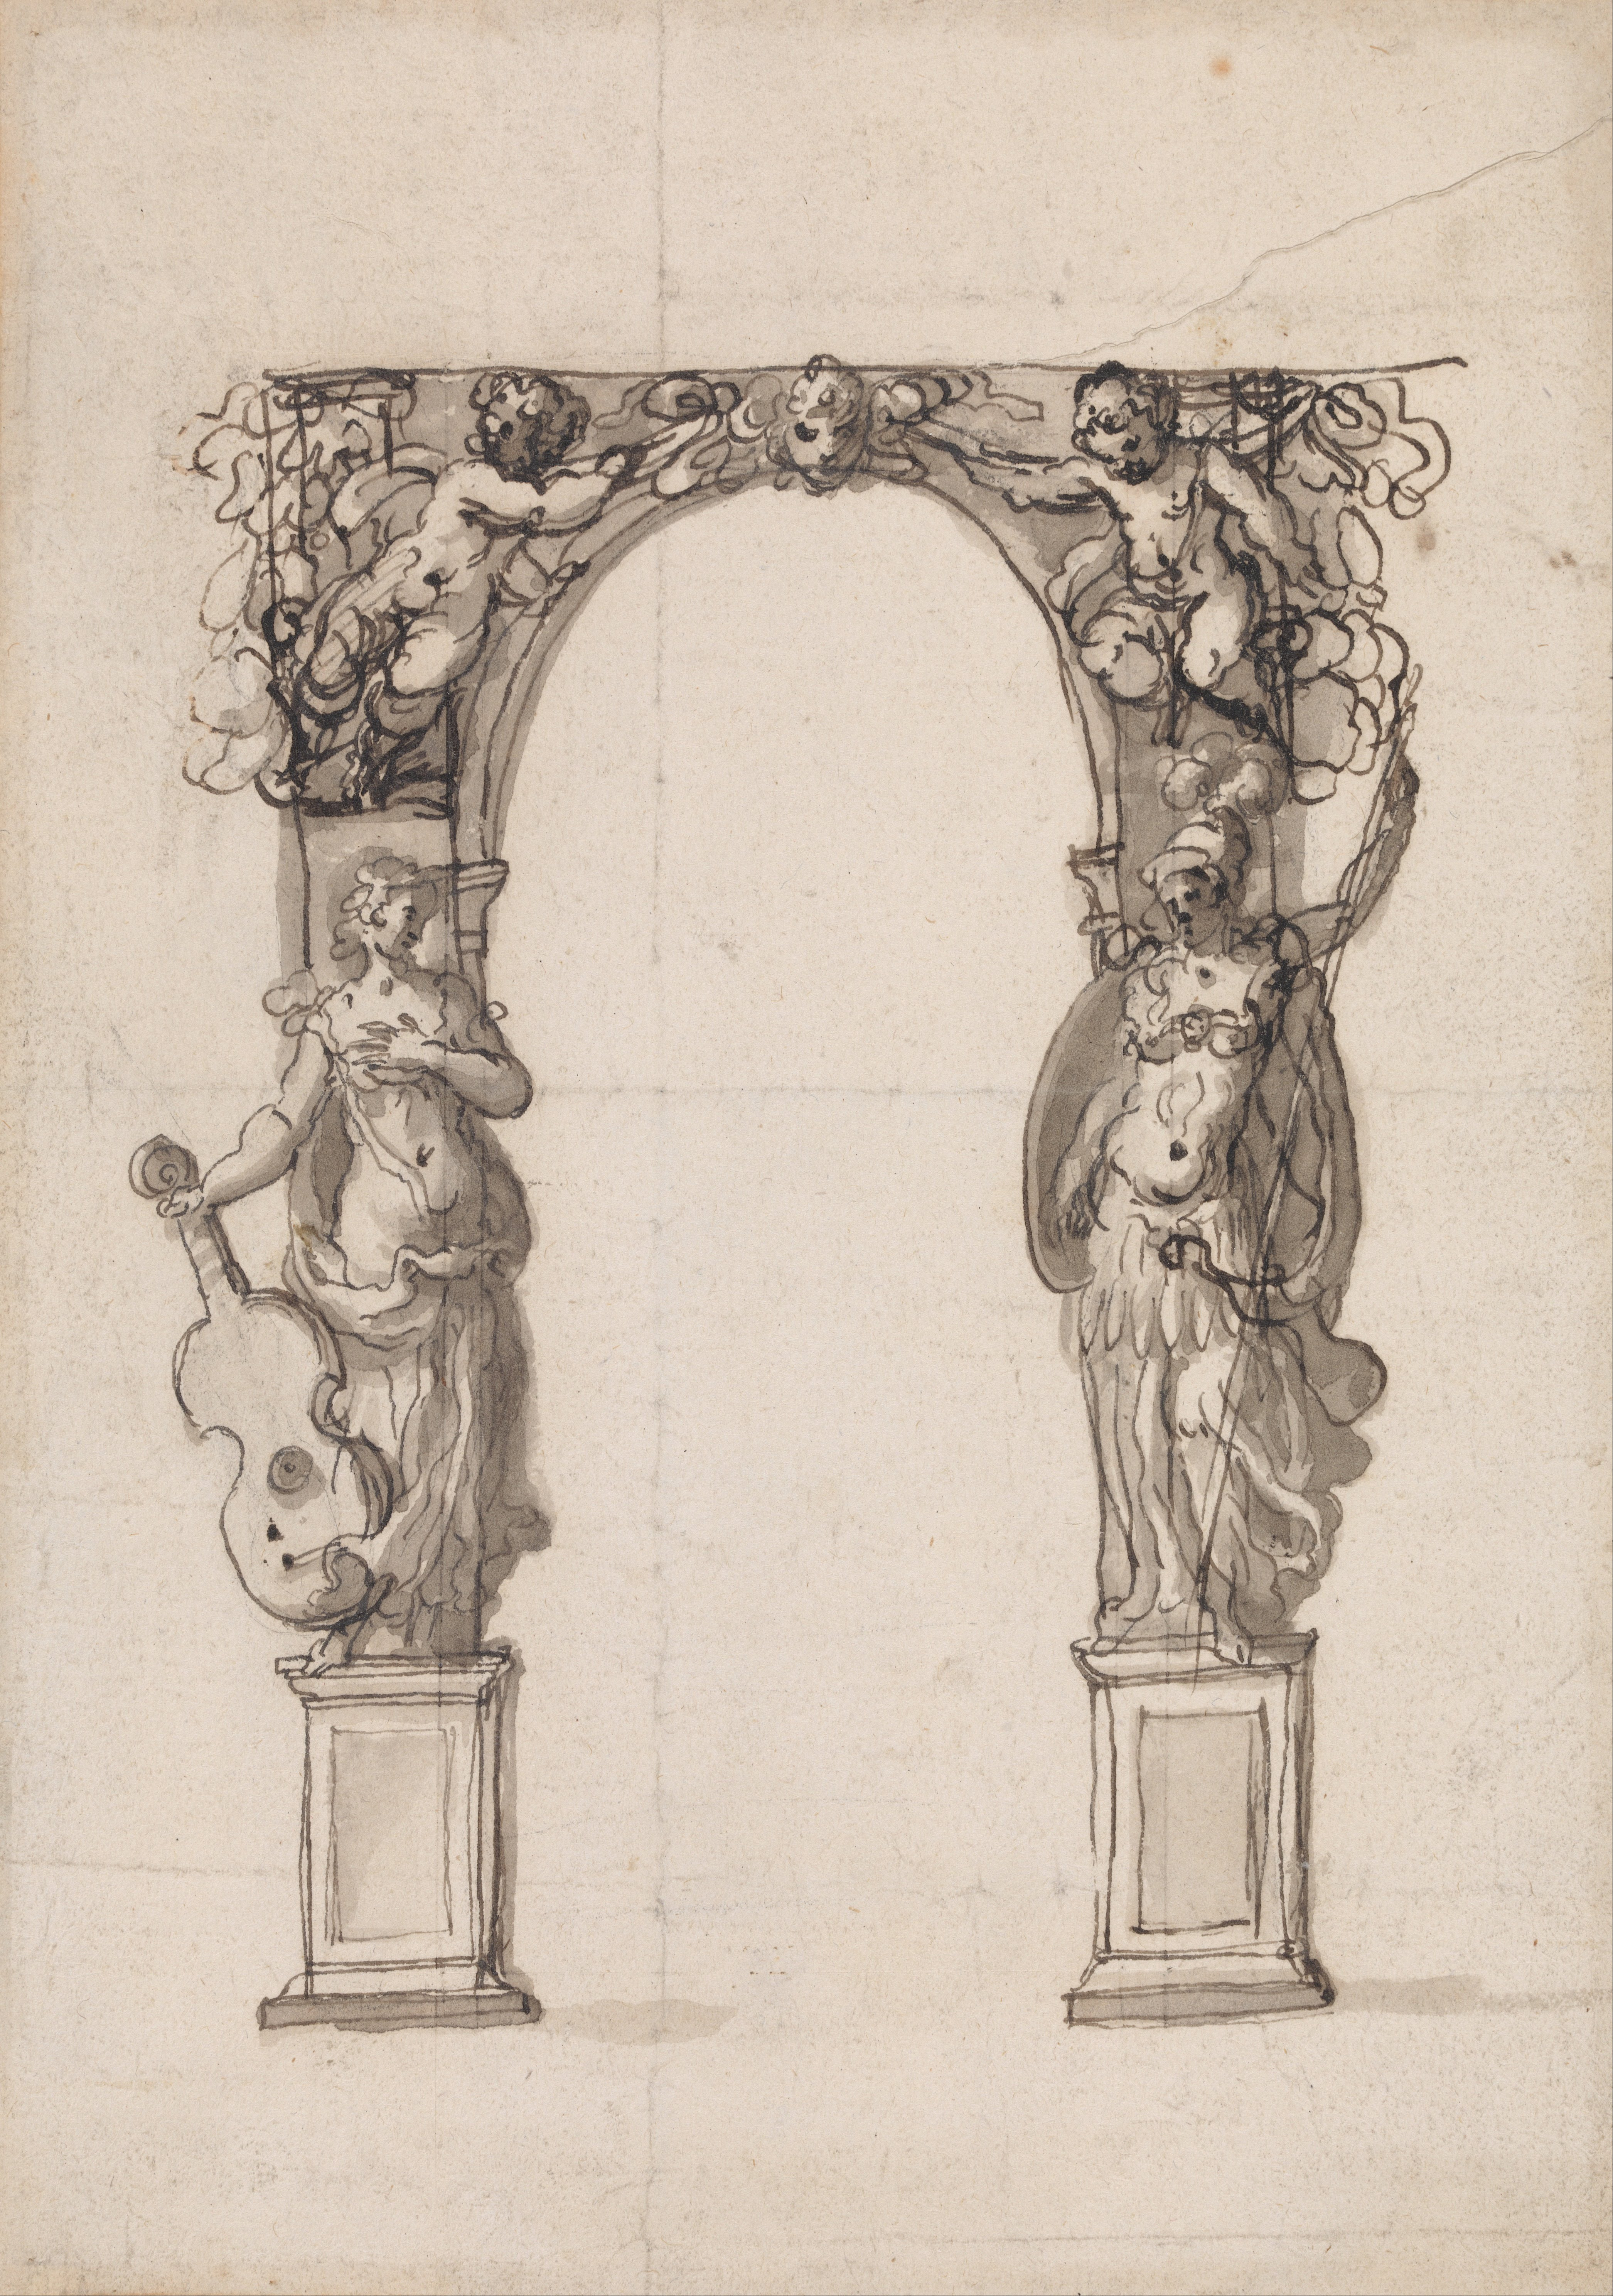 File Inigo Jones Design For A Temporary Arch Ornamented With Putti And Allegorical Figures Of Music And War Google Art Project Jpg Wikimedia Commons